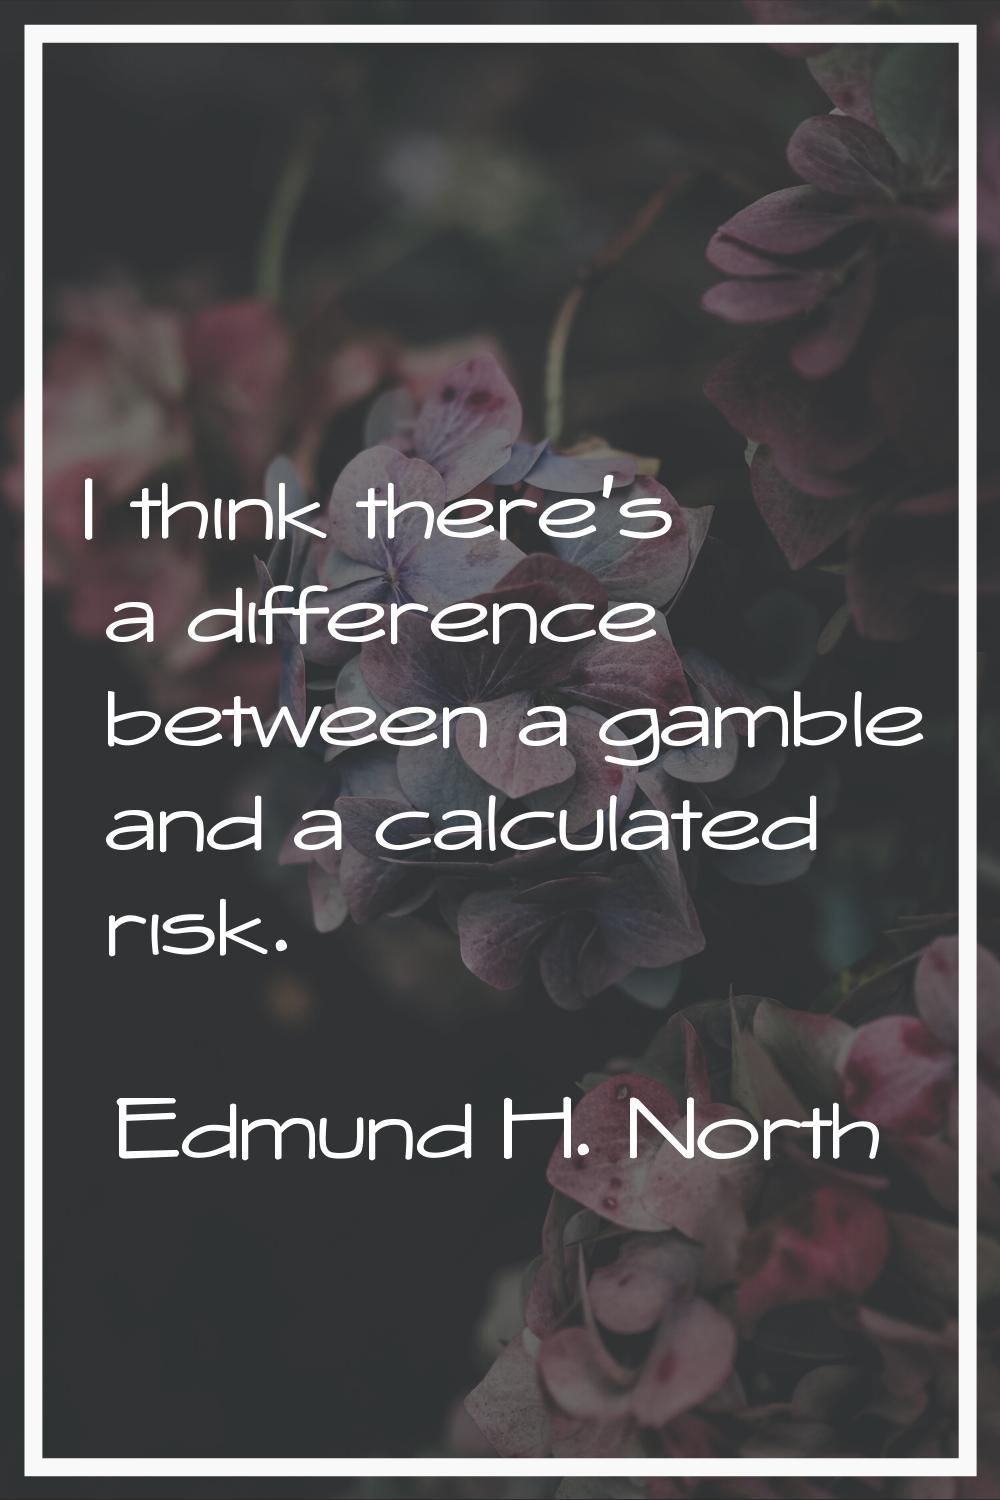 I think there's a difference between a gamble and a calculated risk.